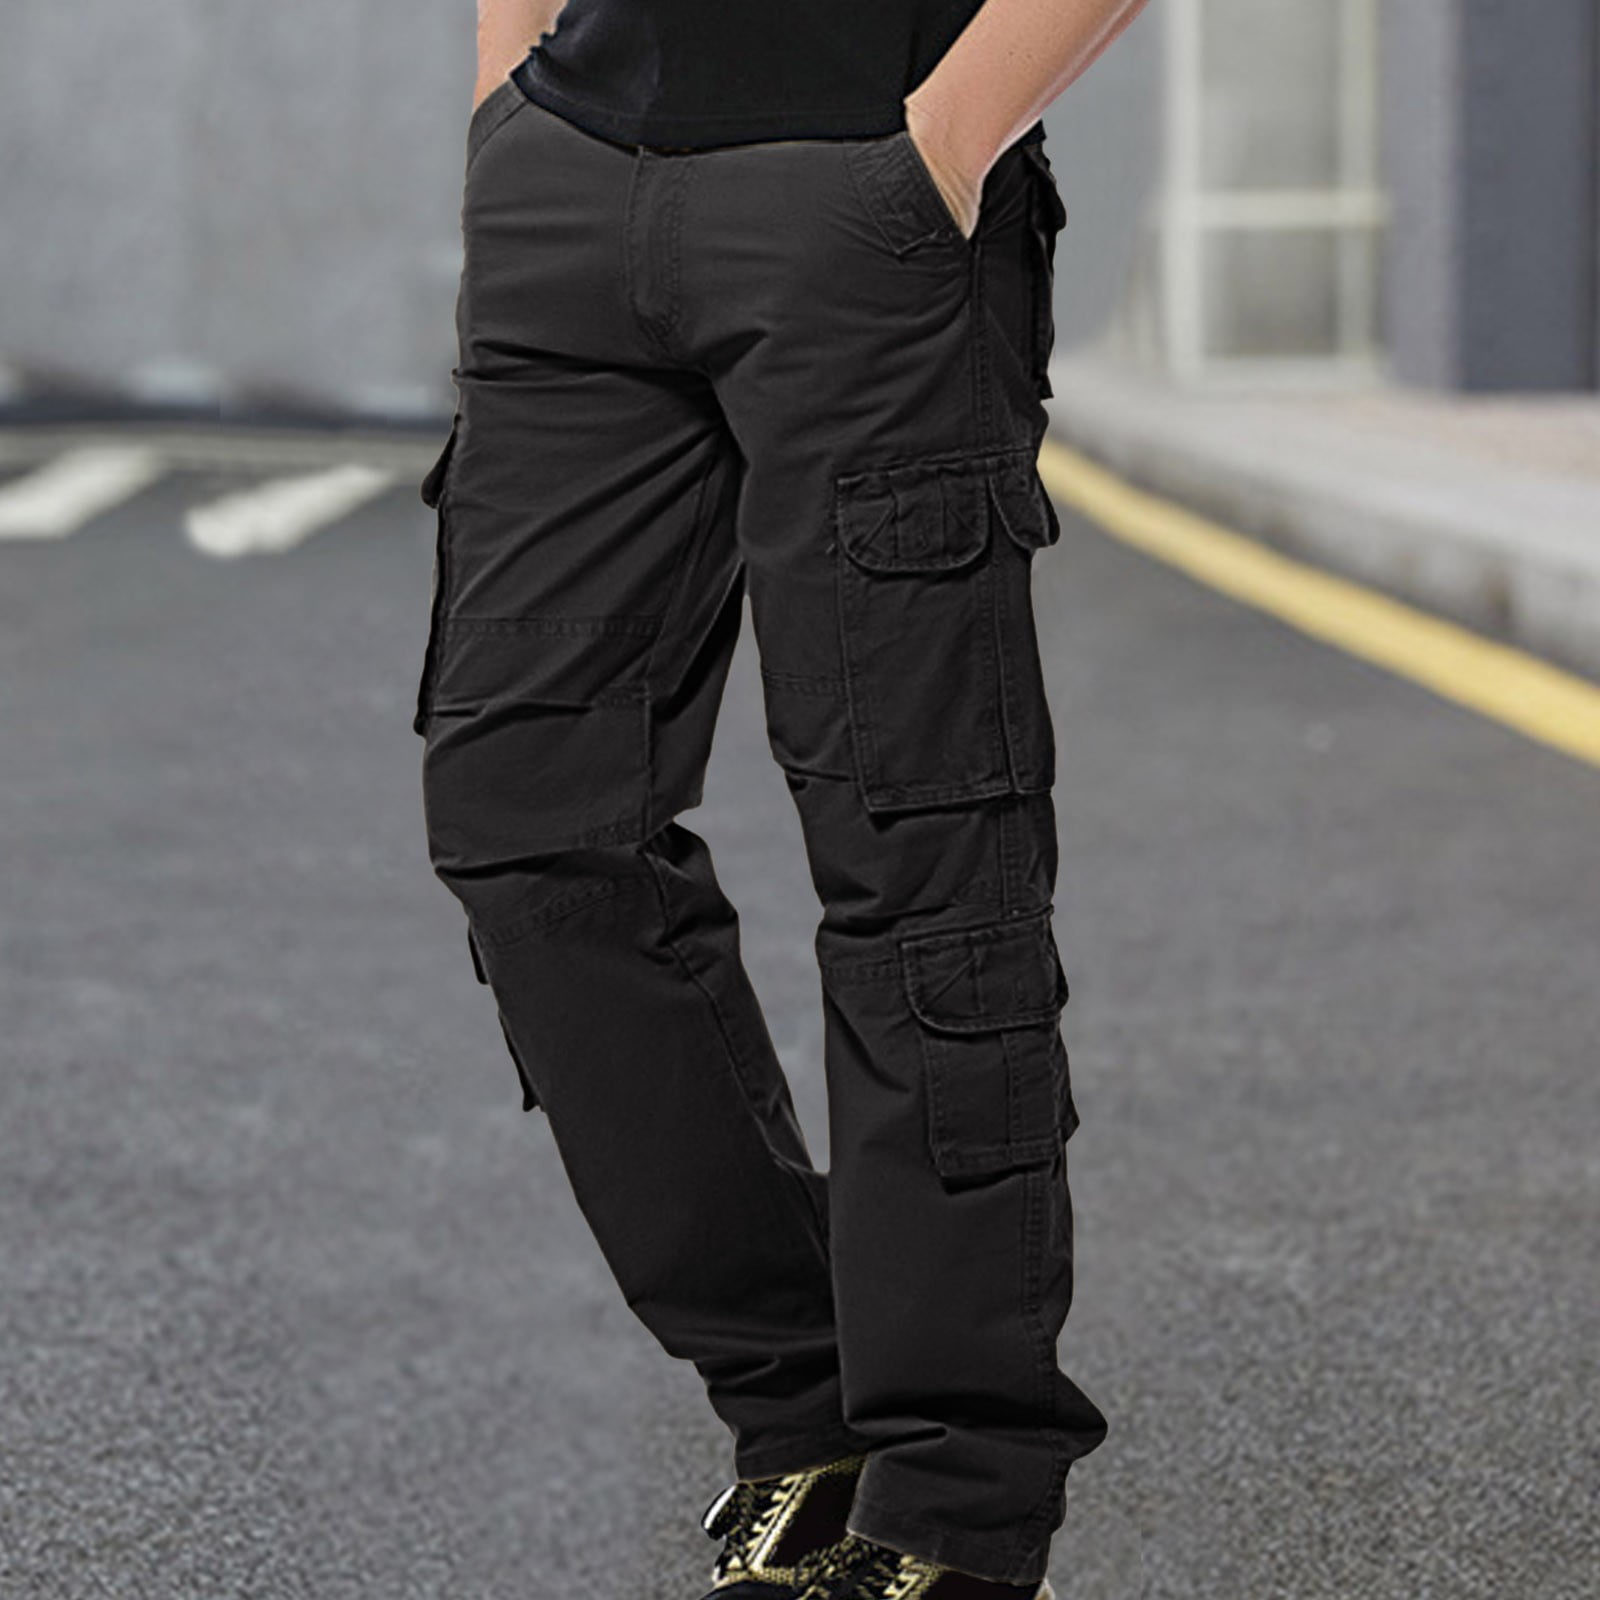 Black cargo pants men • Compare & see prices now »-mncb.edu.vn